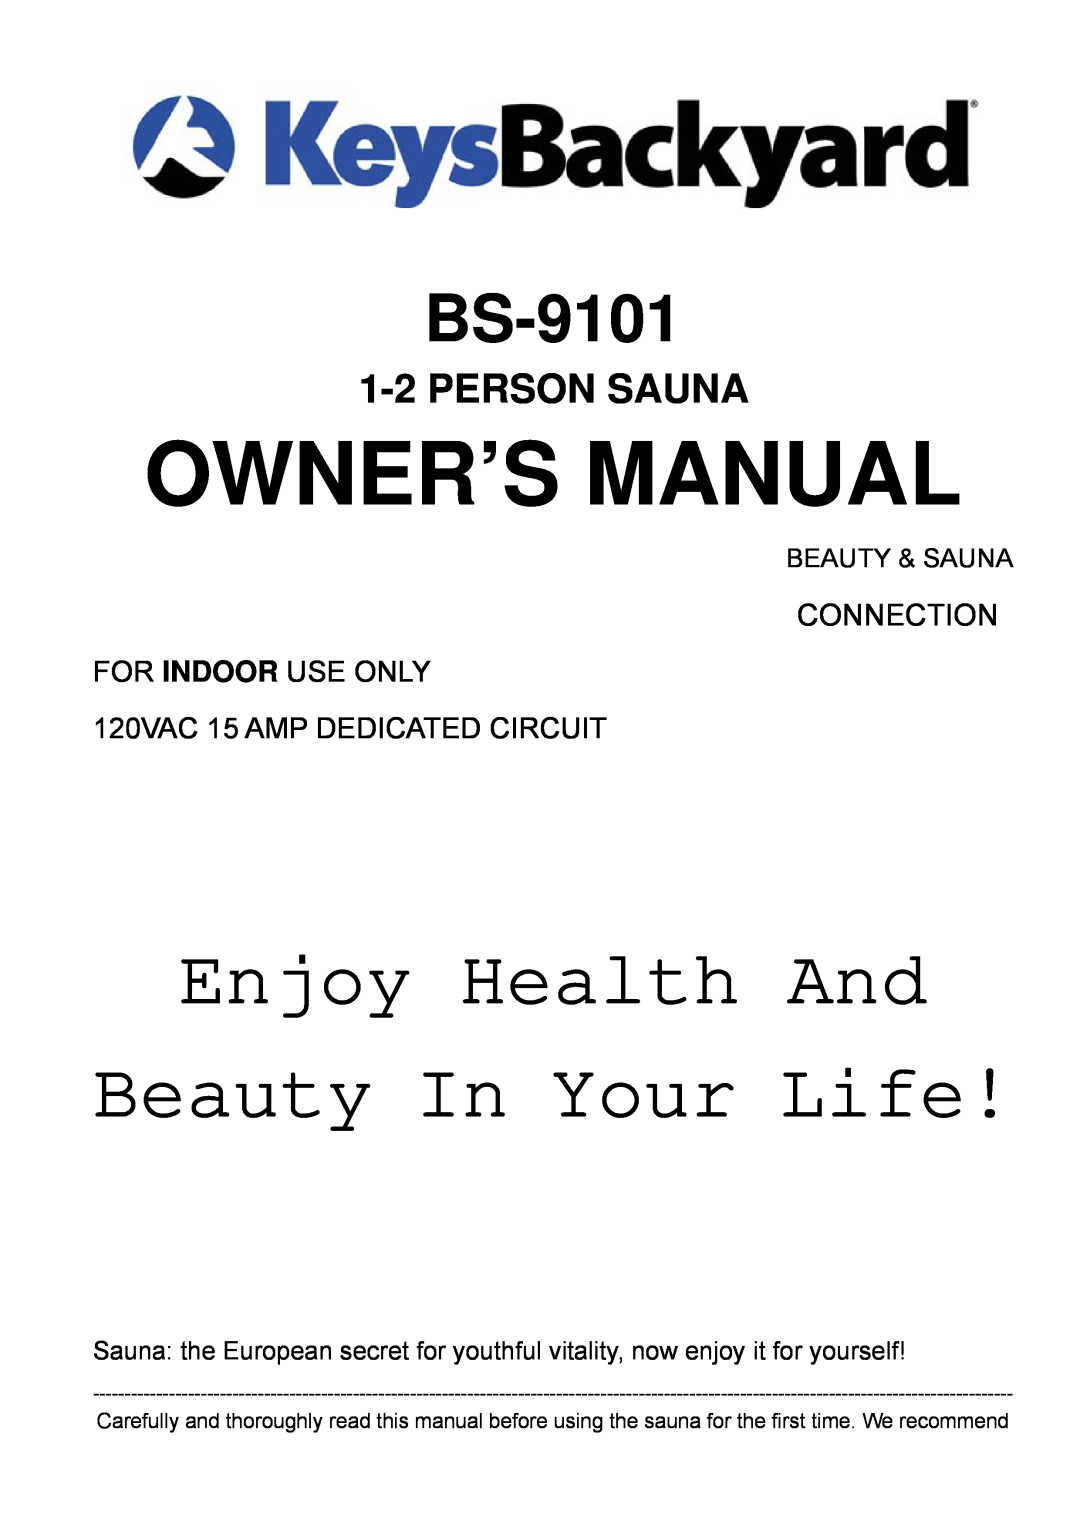 Keys Fitness BS-9101 owner manual 1-2PERSON SAUNA, Enjoy Health And Beauty In Your Life, Connection, For Indoor Use Only 